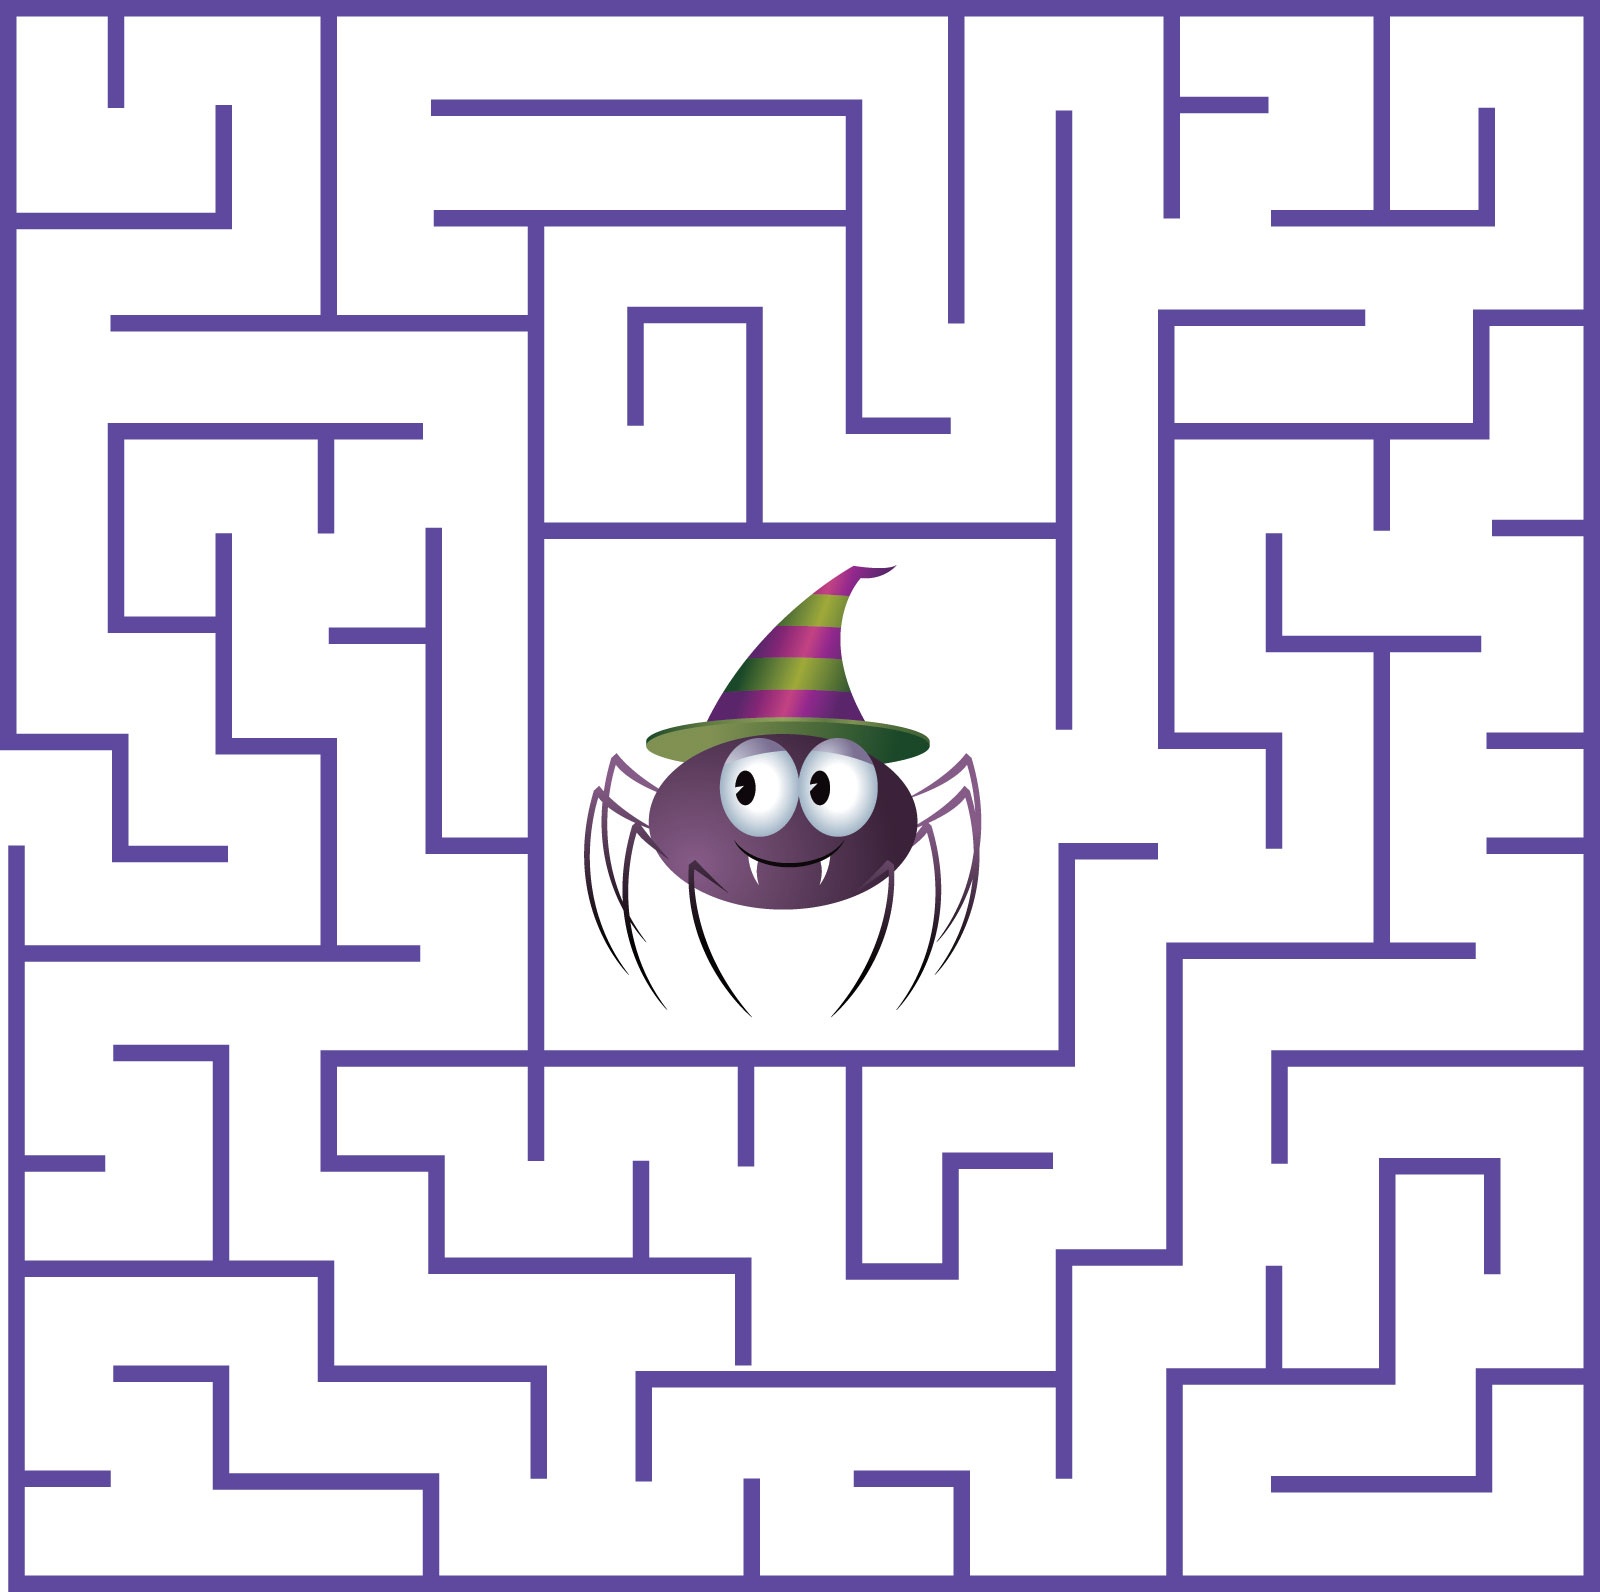 28 Free Printable Mazes For Kids And Adults | Kittybabylove - Free Printable Mazes